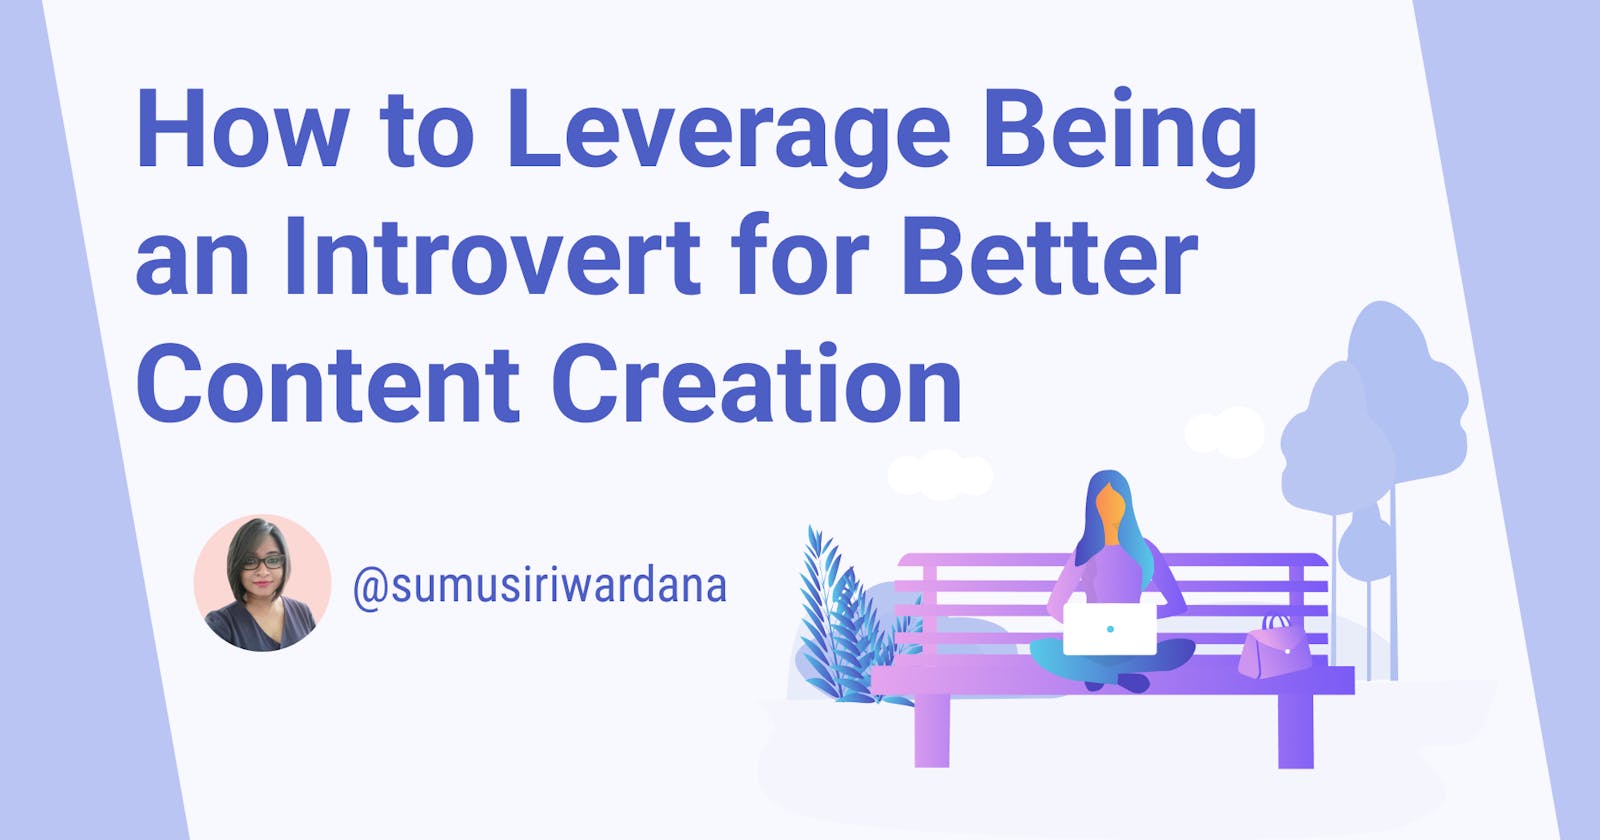 How to Leverage Being an Introvert for Better Content Creation